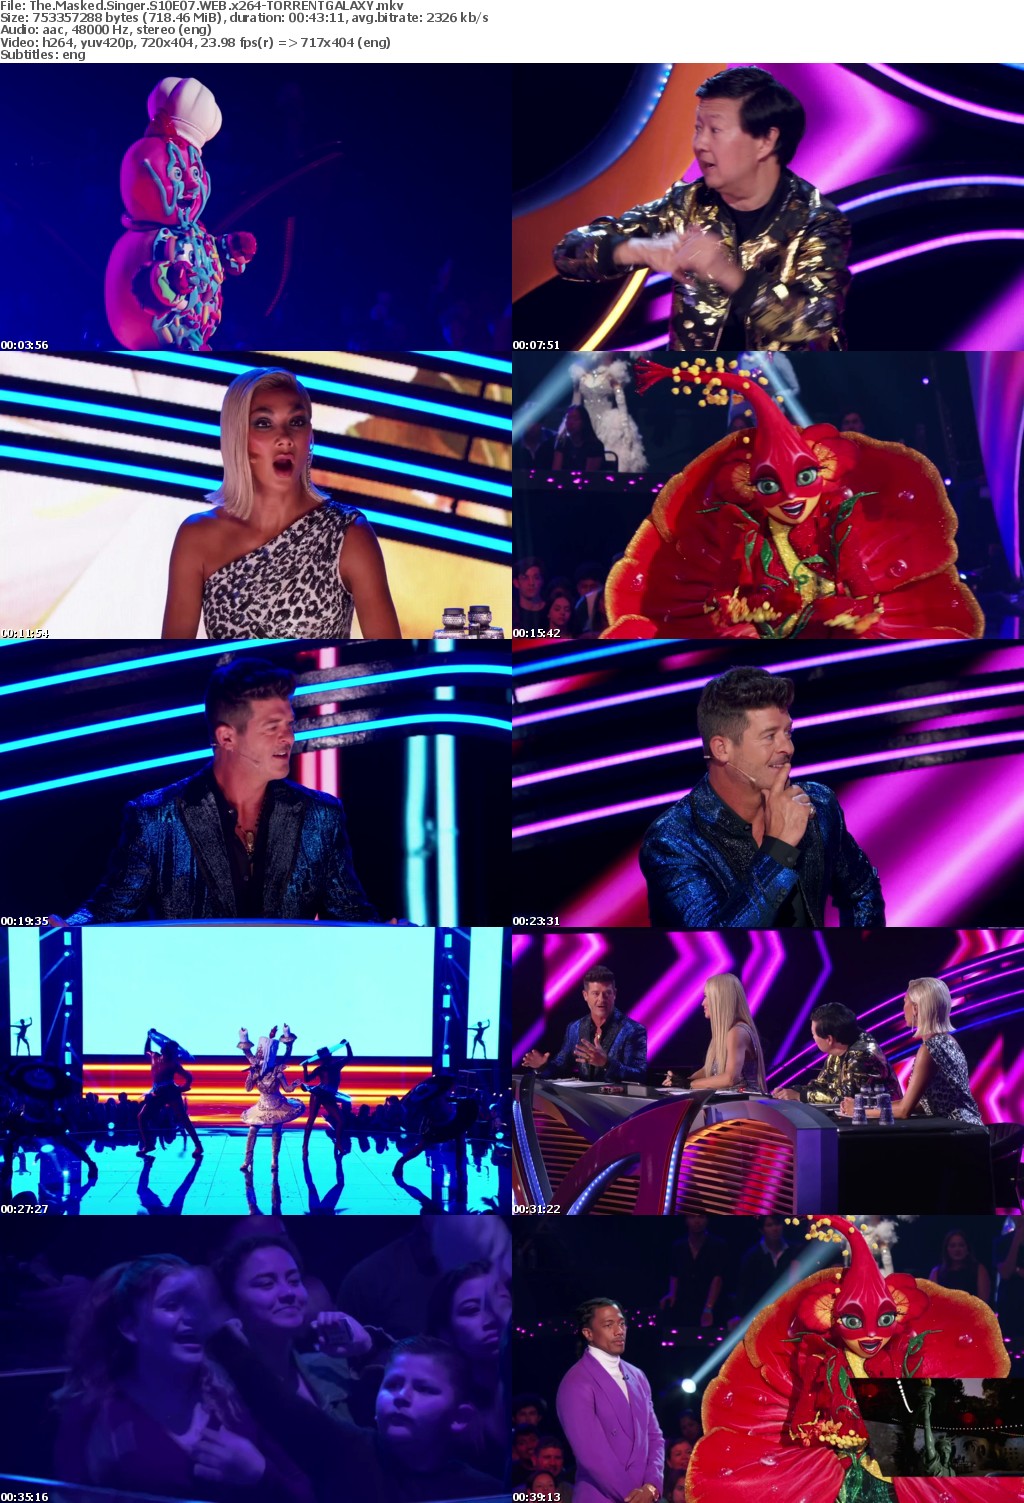 The Masked Singer S10E07 WEB x264-GALAXY